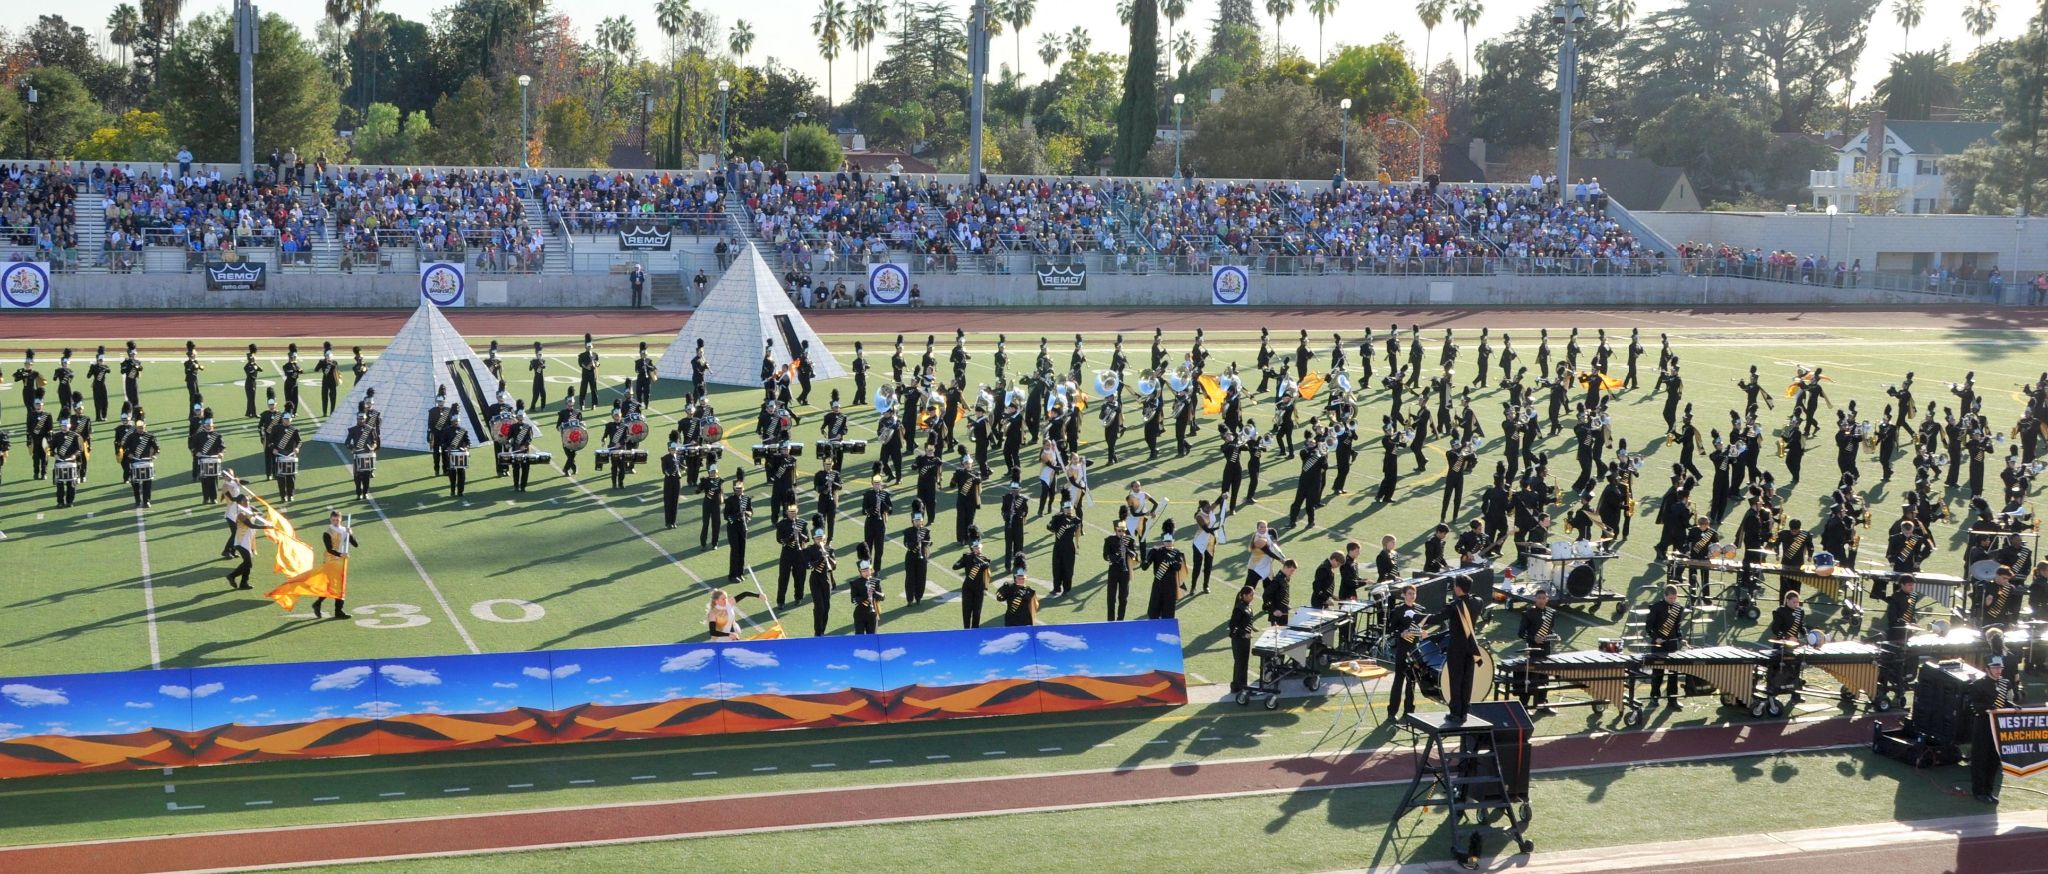 The largest marching band in Virginia and is only the third band from the Commonwealth to march in the Rose Parade. 